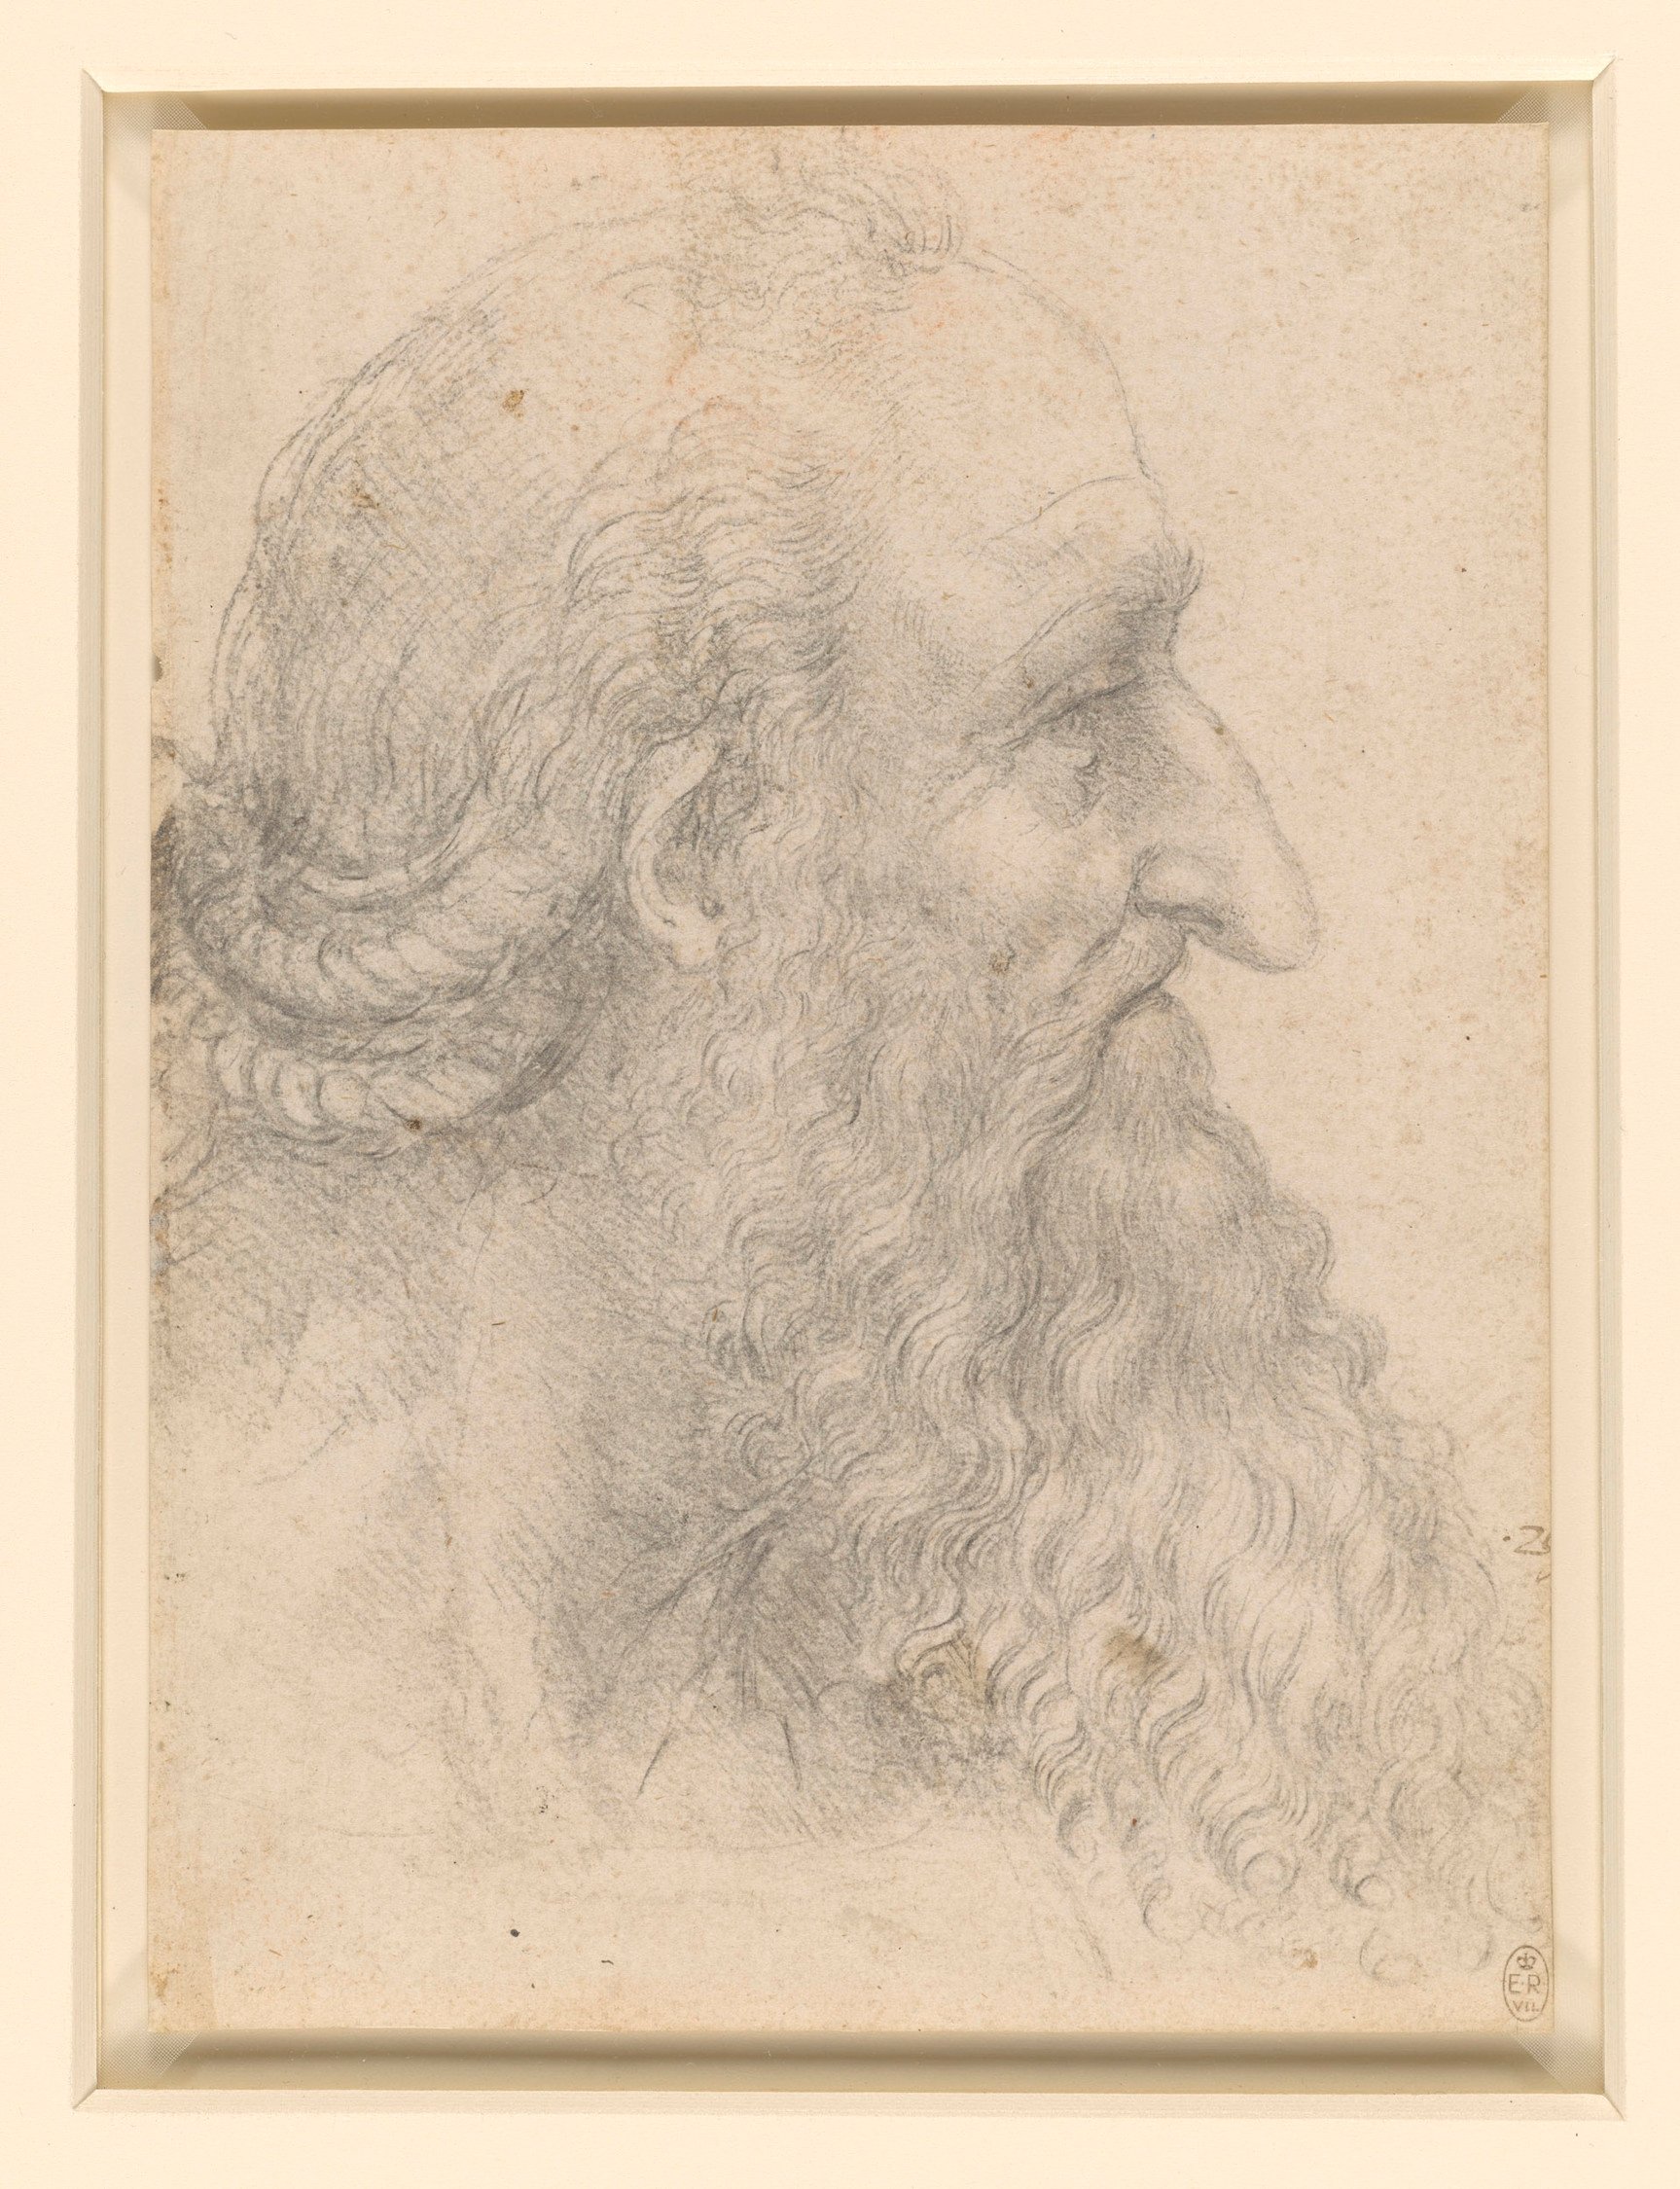 A drawing by the artist Leonardo da Vinci of an elderly man in profile view and looking to the right. Leonardo da Vinci (Vinci 1452-Amboise 1519). "The head of an old bearded man," c. 1517-18. Black chalk, 21.3 x 15.5 cm (sheet of paper), The Royal Collection